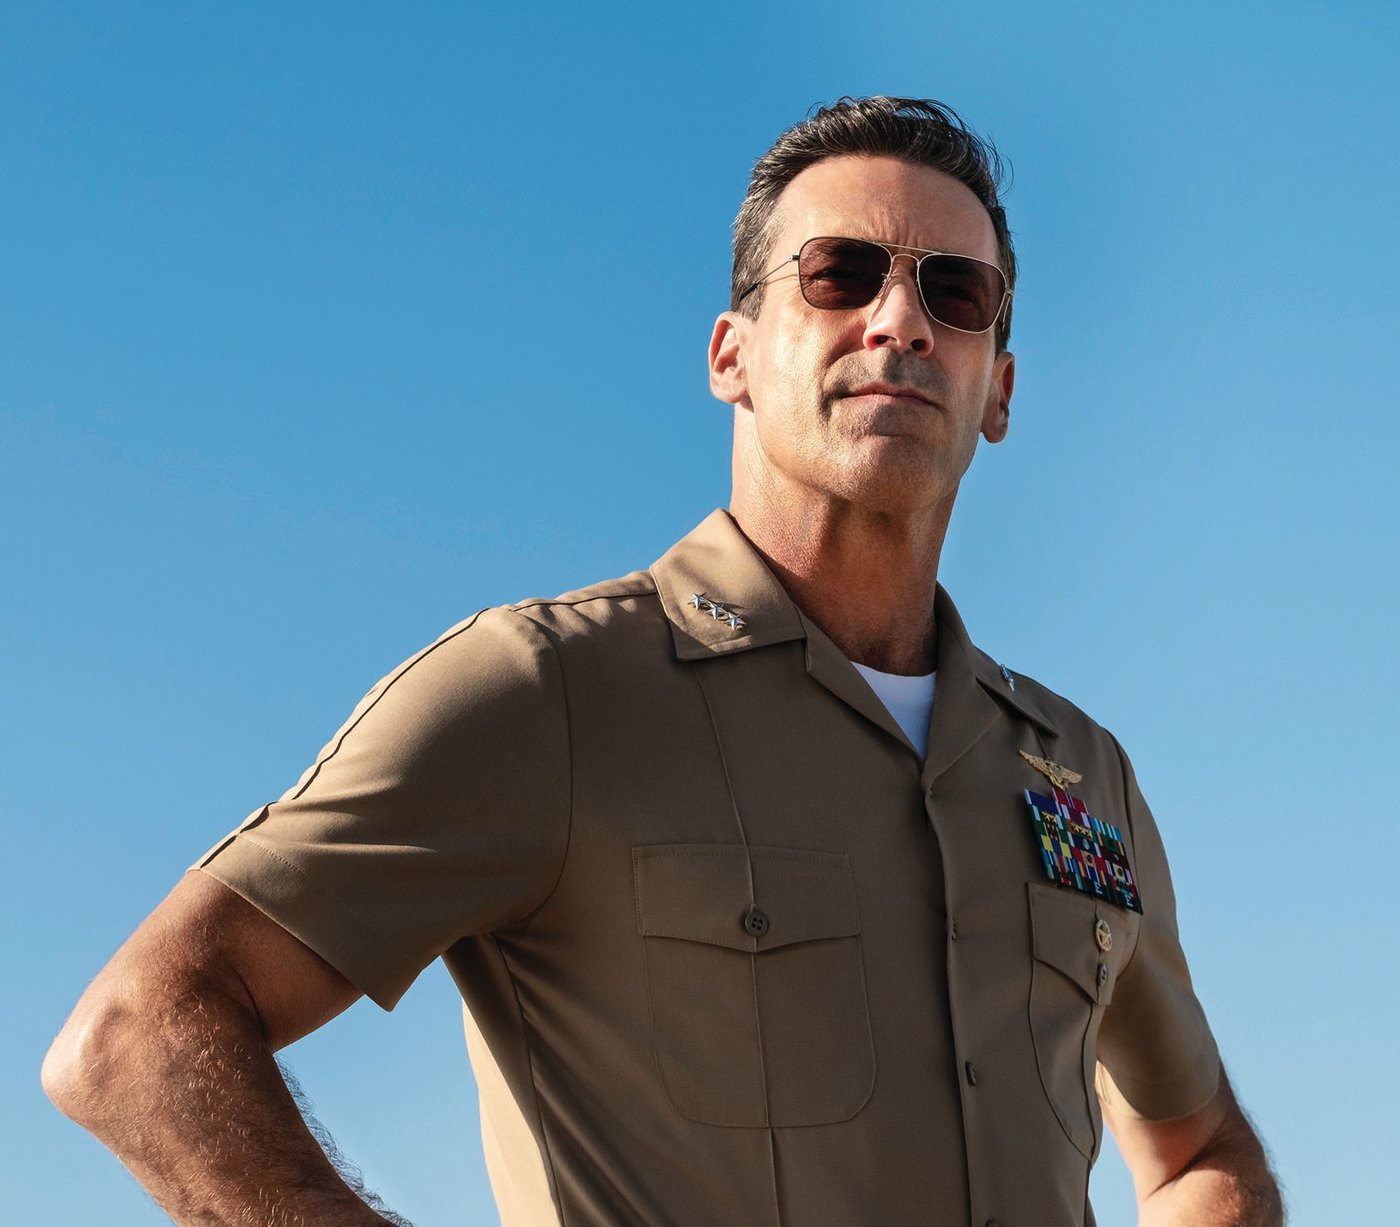 Jon Hamm as Vice Admiral Cyclone in the upcoming movie Top Gun: Maverick PHOTO COURTESY OF: PARAMOUNT PICTURES